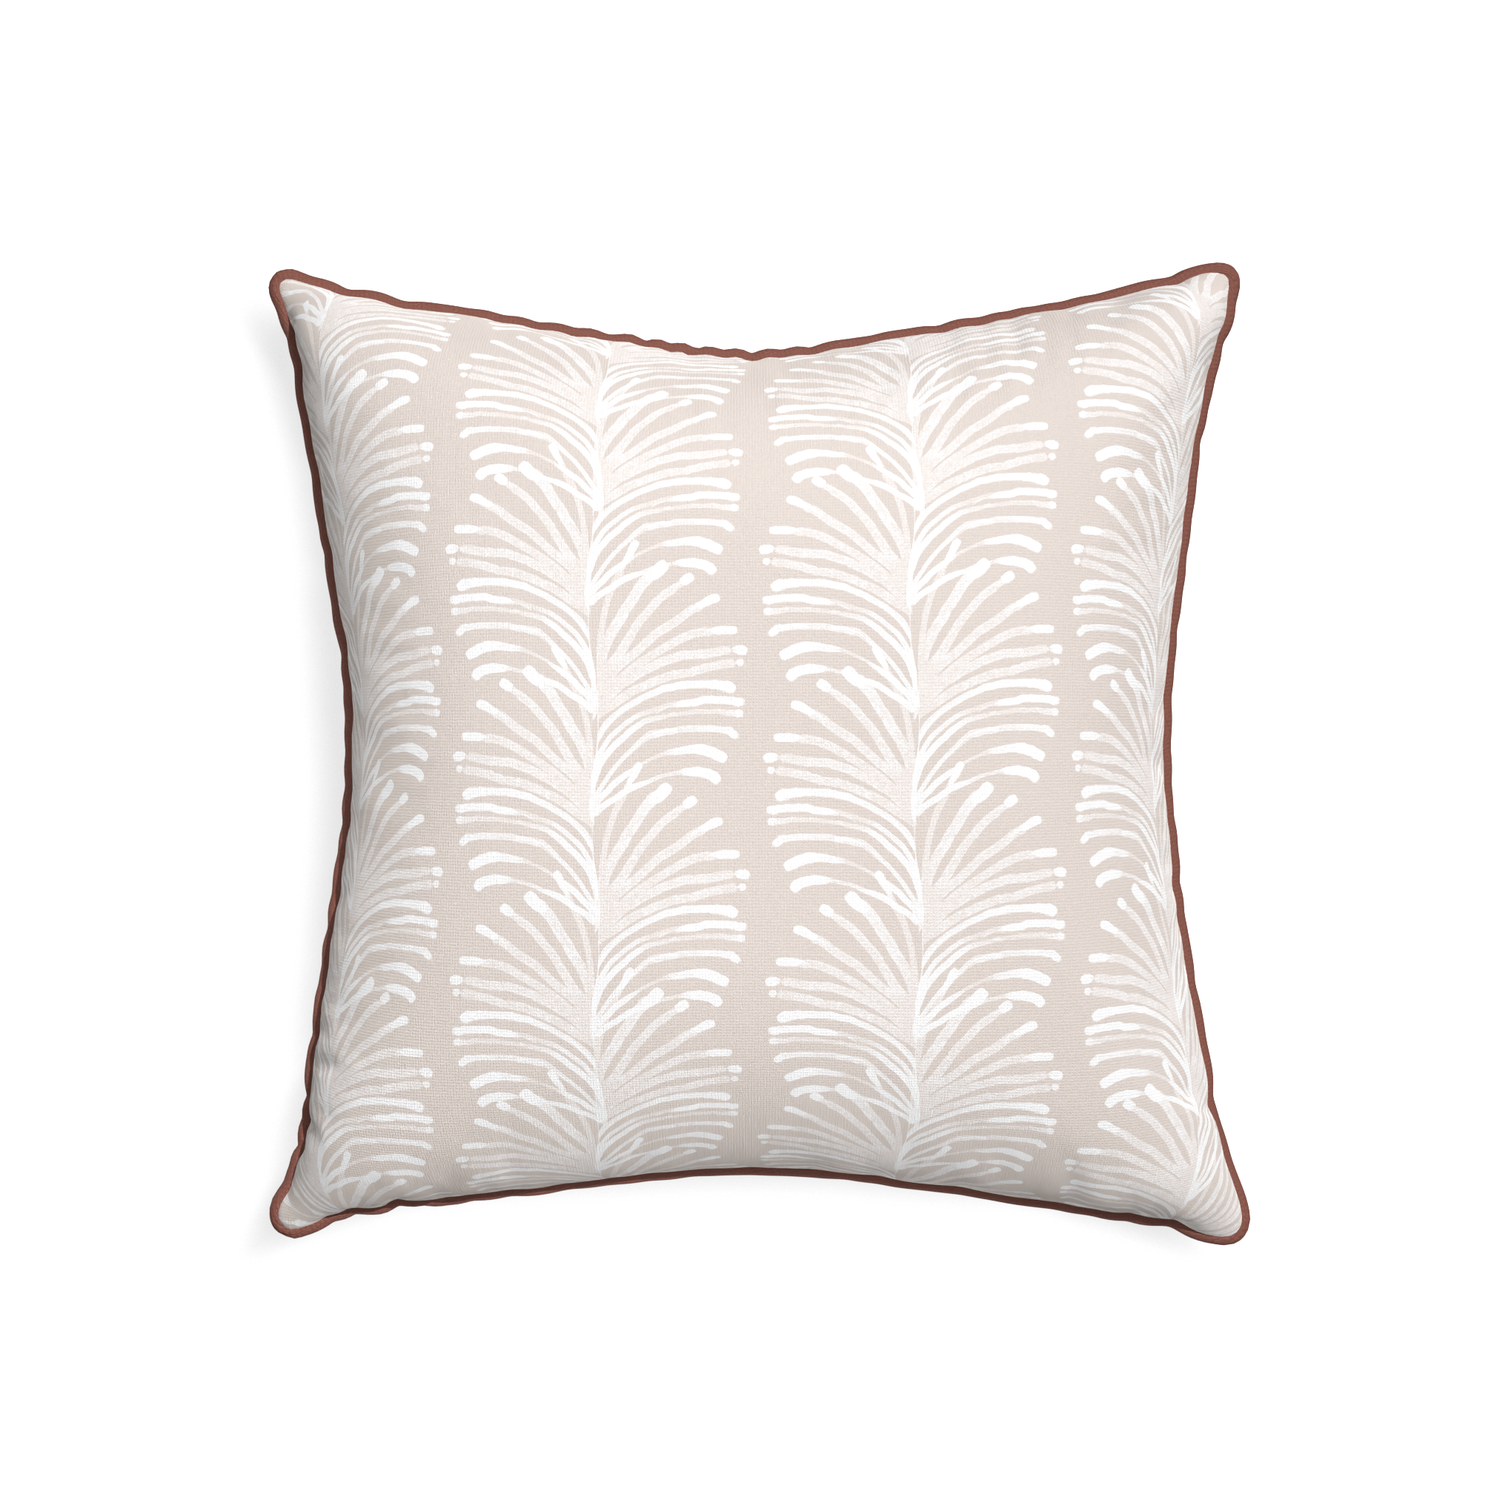 22-square emma sand custom sand colored botanical stripepillow with w piping on white background